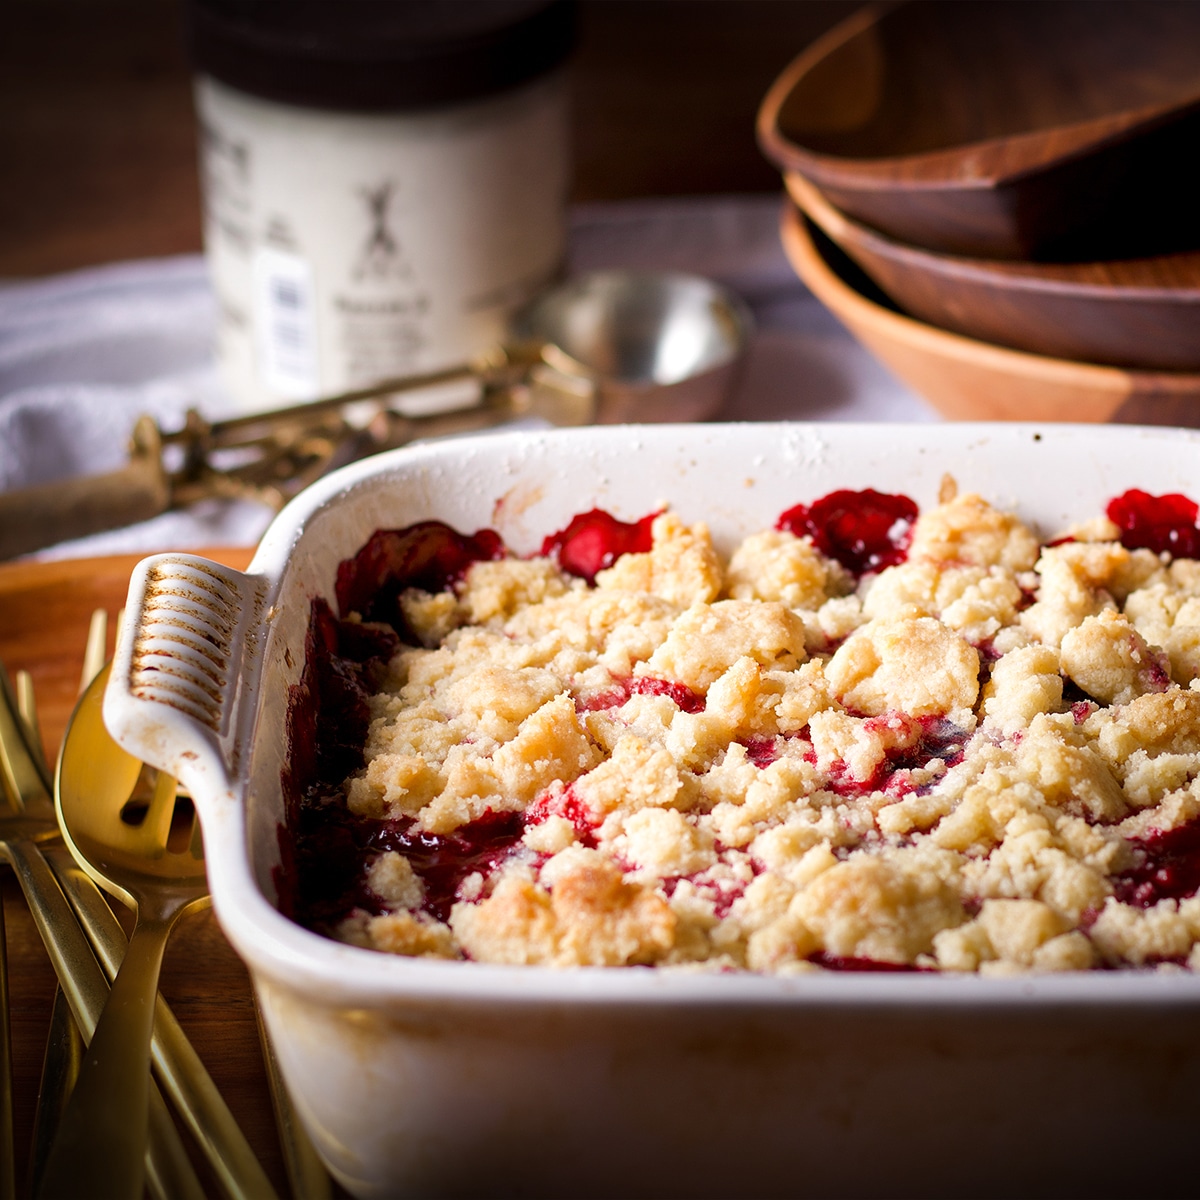 A pan of freshly baked berry cobbler cooling on a wood cutting board with bowls, spoons, and a container of vanilla ice cream near by.